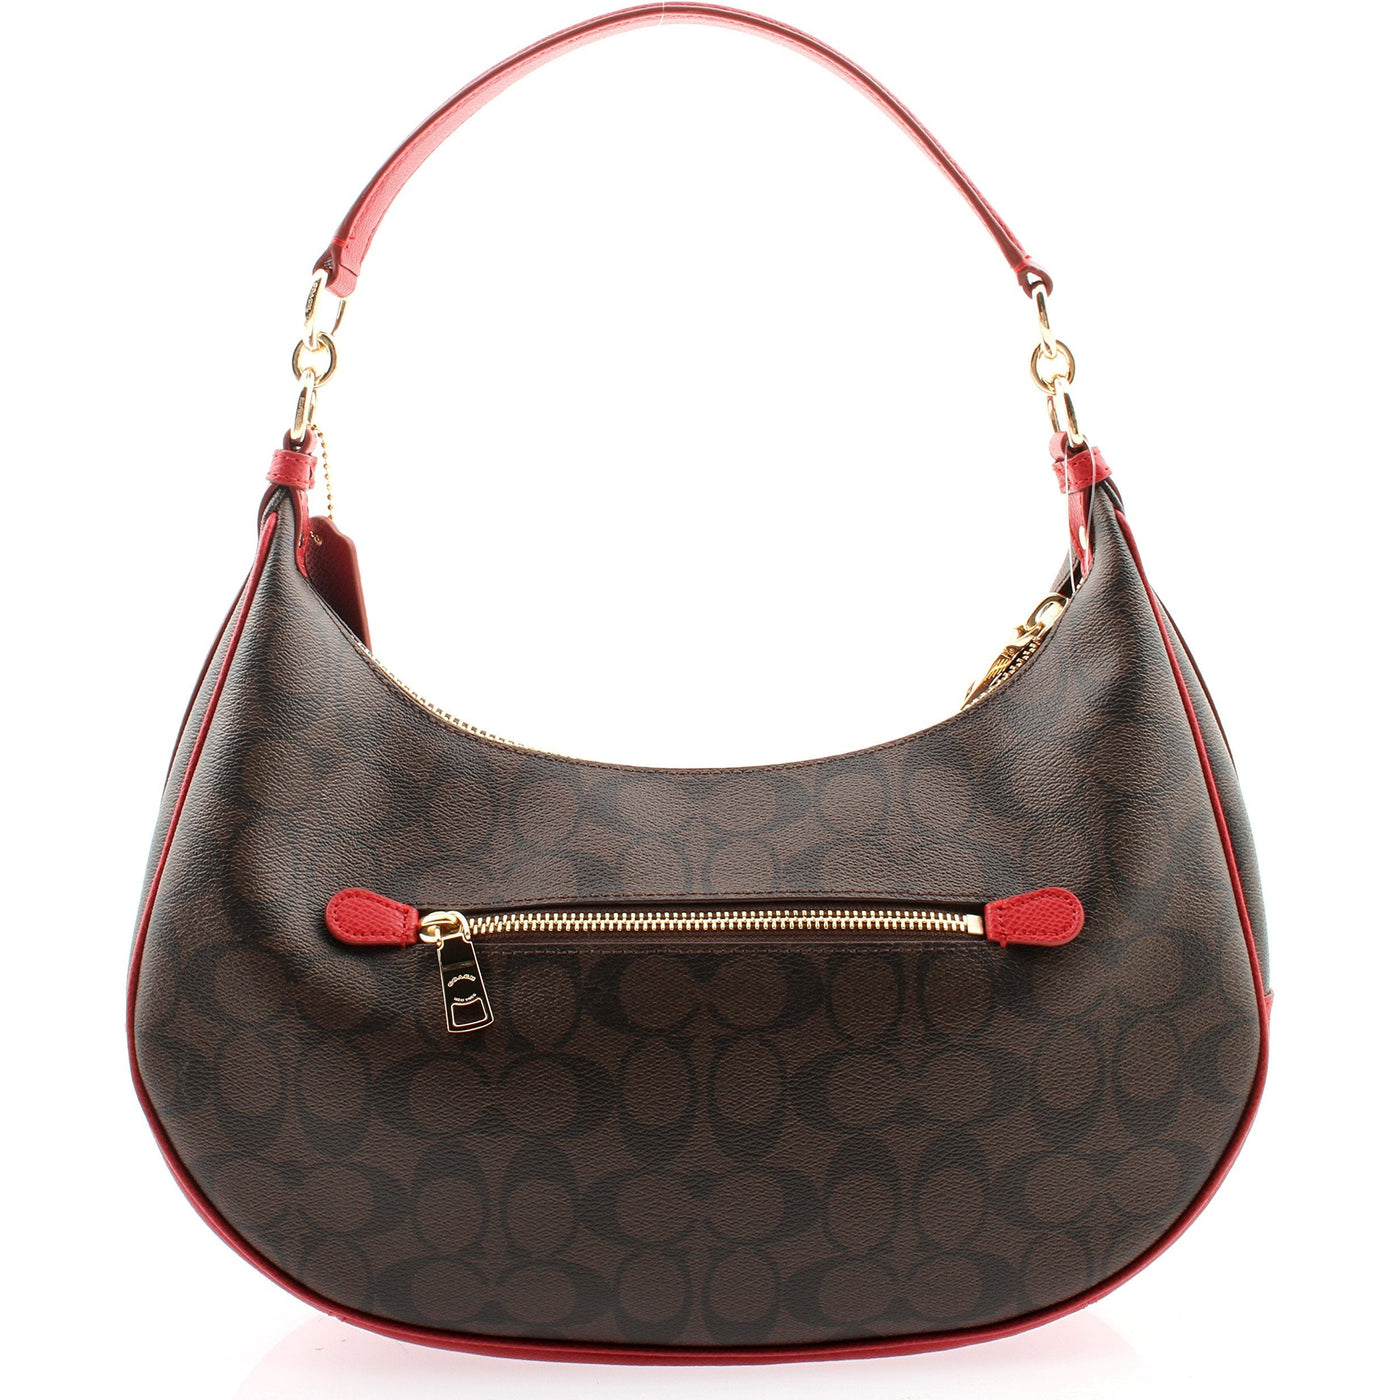 Coach Signature Harley East West Hobo Brown/Red Bag